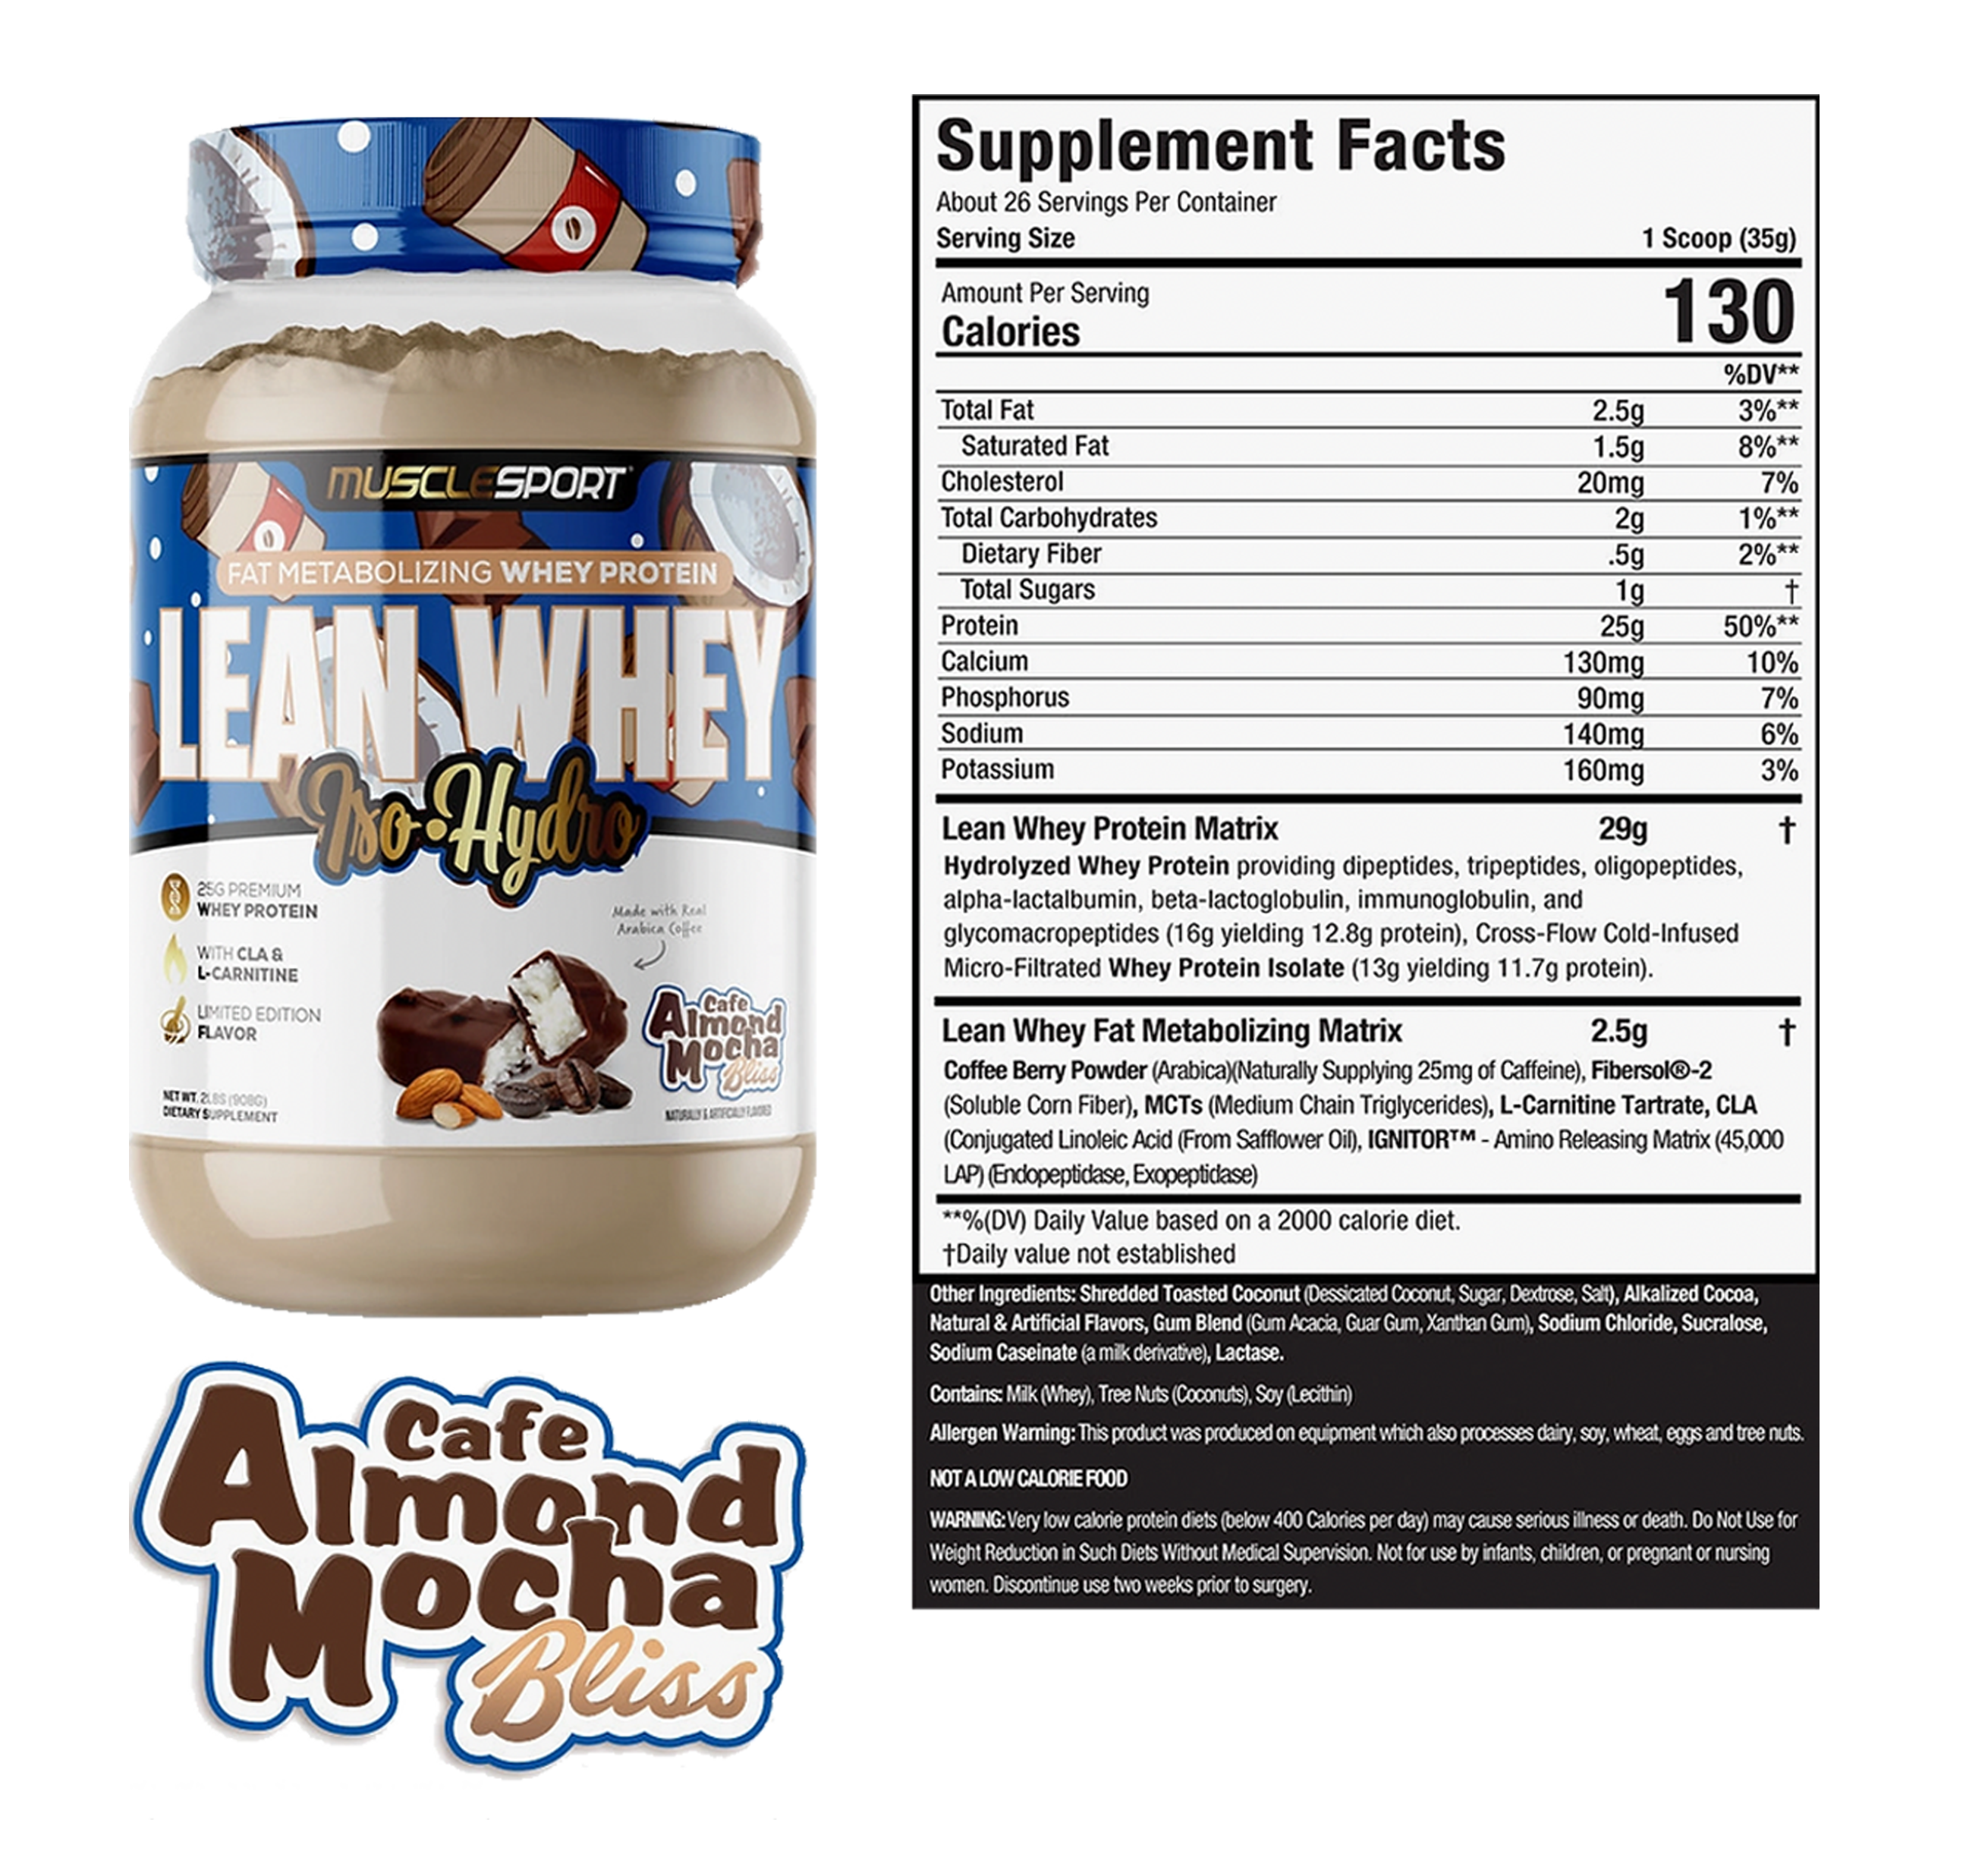 MUSCLESPORT LEAN WHEY 2LBS